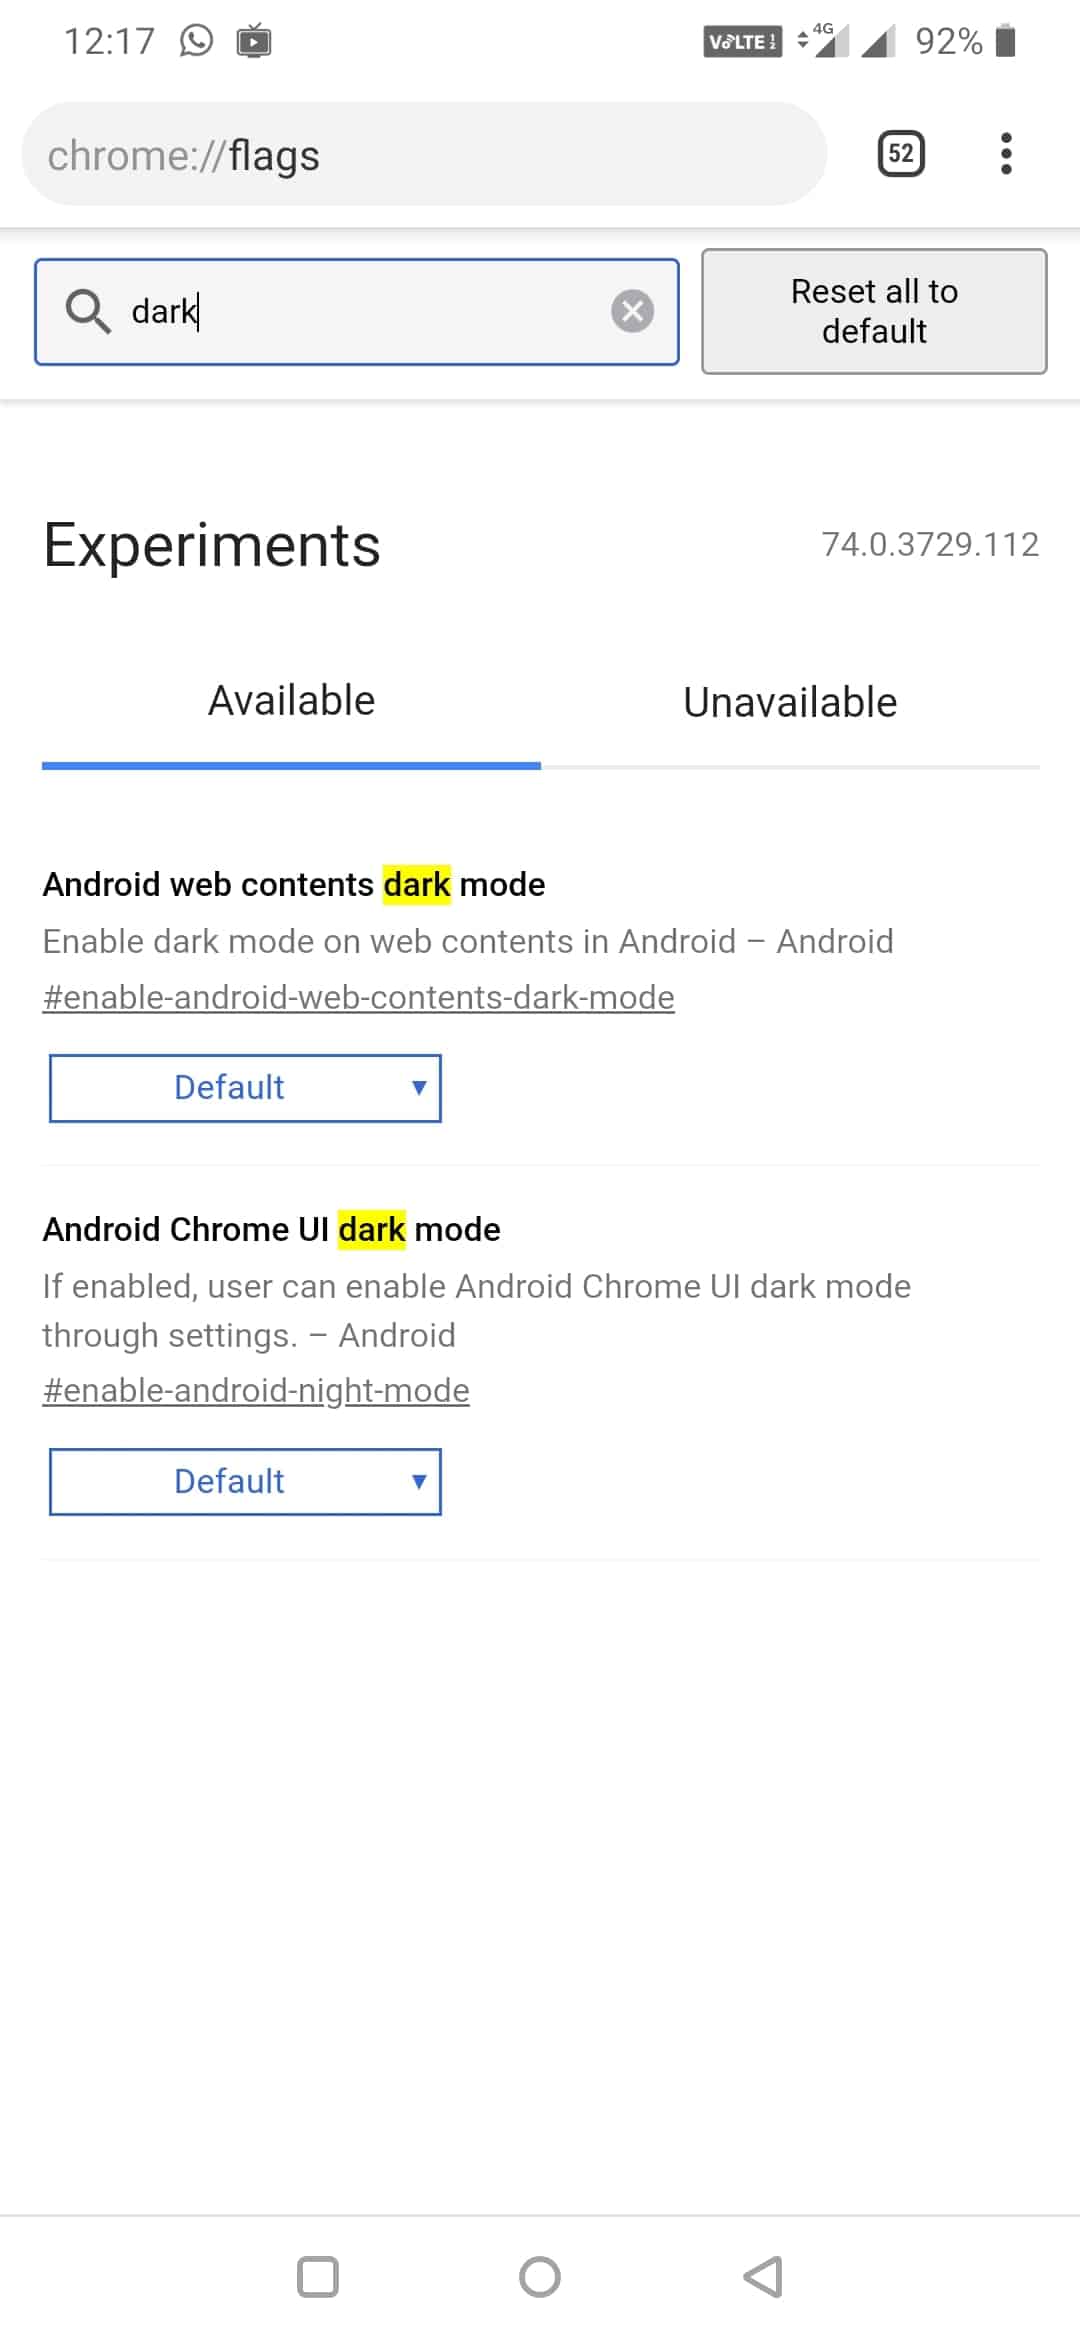 chrome flags to Activate Dark mode on Chrome